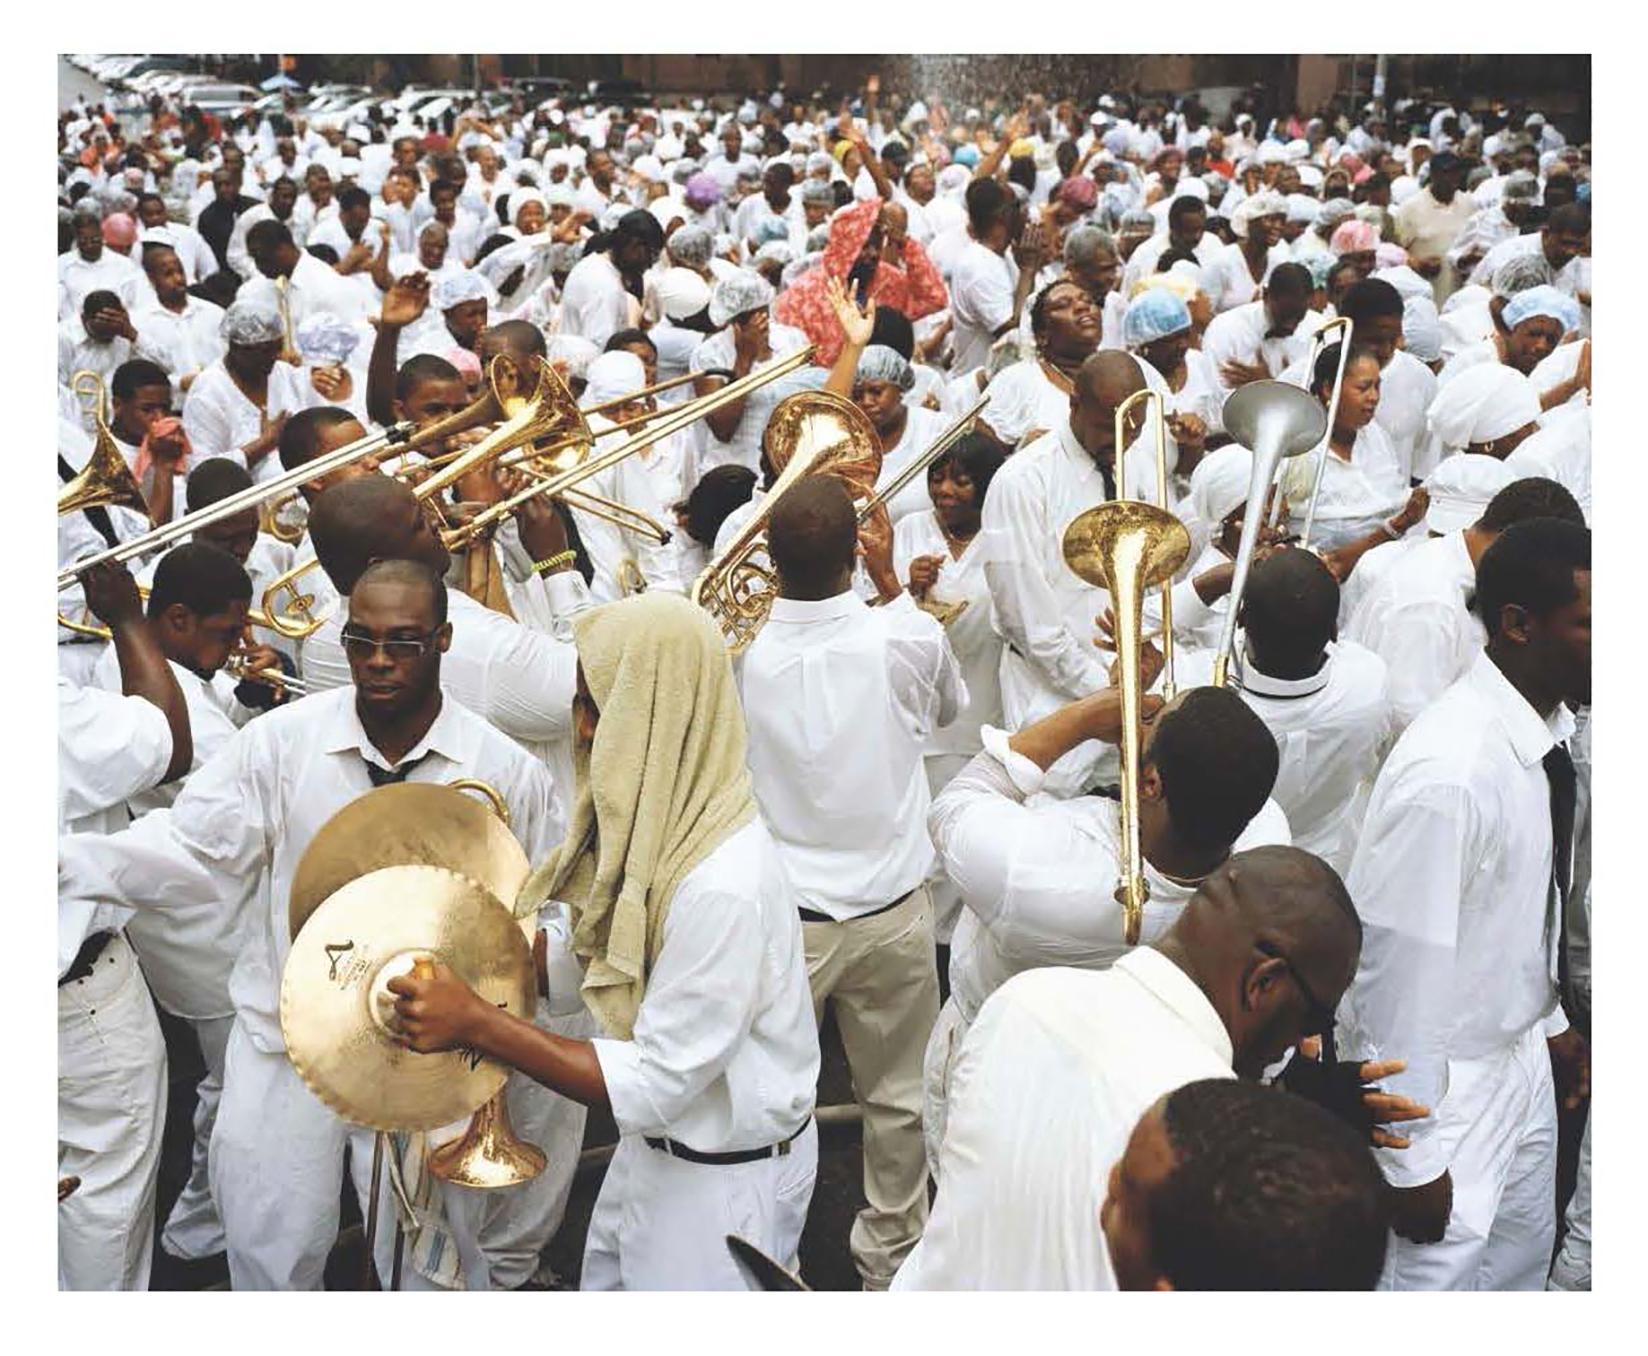 'God's Trombones' by American photographer Frank Stewart, 2009. Printed later. Pigment print, 20 x 30 inches. This photograph features Harlem during the baptism in the street, an annual occurence in East Harlem. 

For the past three decades, Stewart